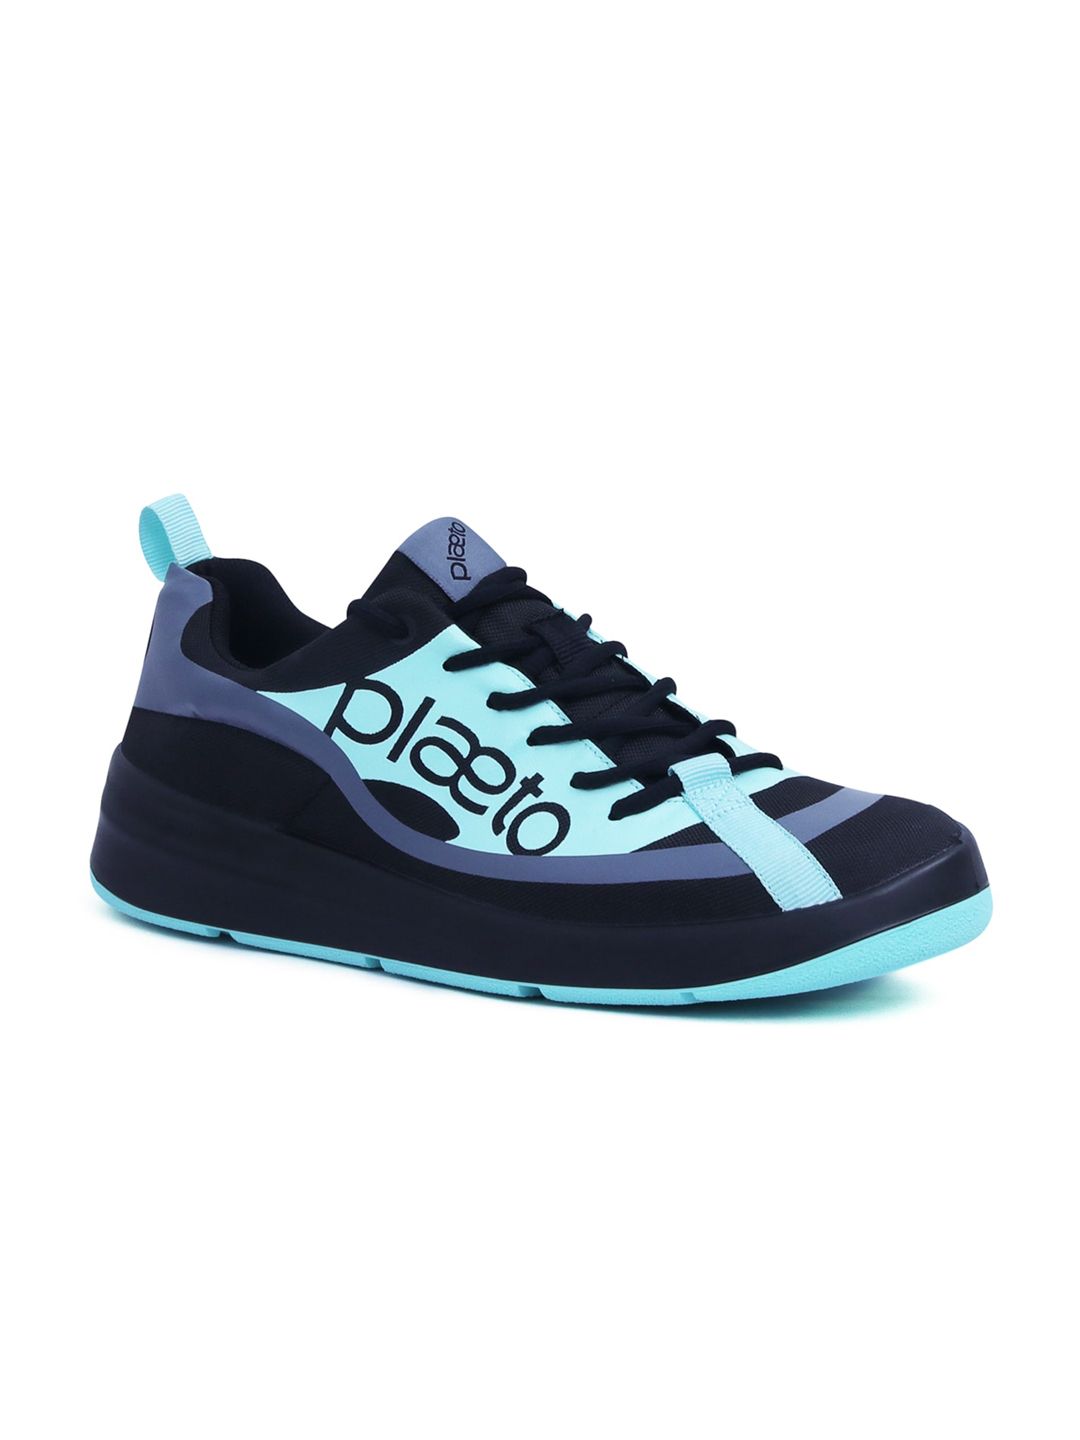 plaeto Printed Sneakers Price in India